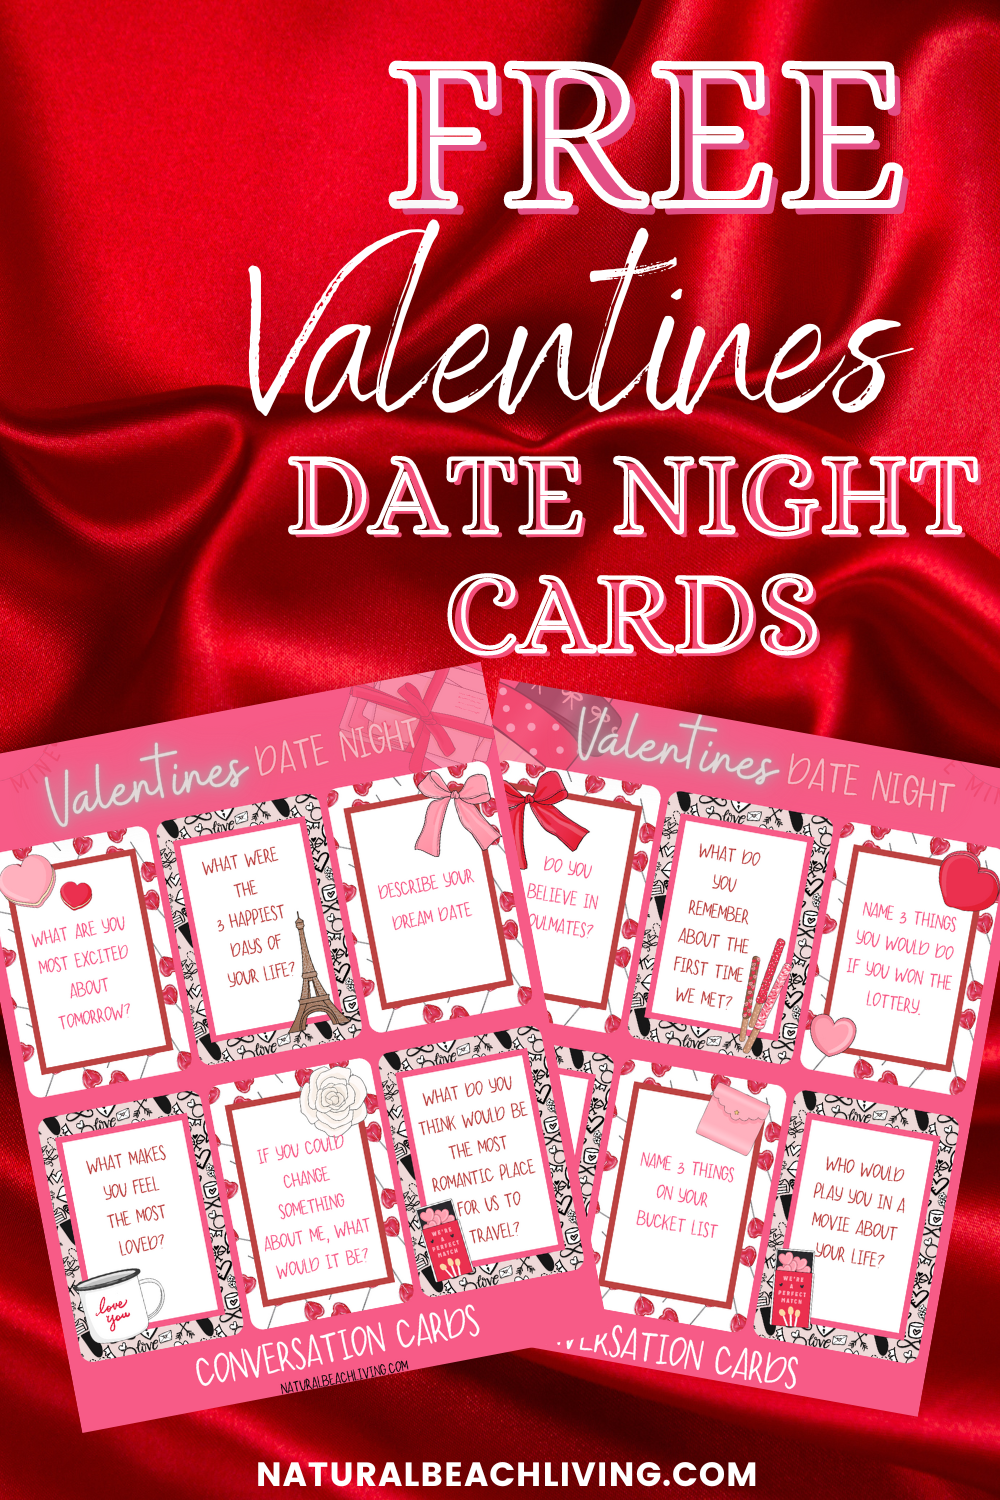 Valentine's Day Date Night Cards, These Free Printable Conversation Cards are thoughtful and fun. They will help you be more spontaneous in your romantic life, offering a range of ideas for conversations and sweet thoughts you can enjoy. Find THE BEST DATE NIGHT IDEAS HERE!